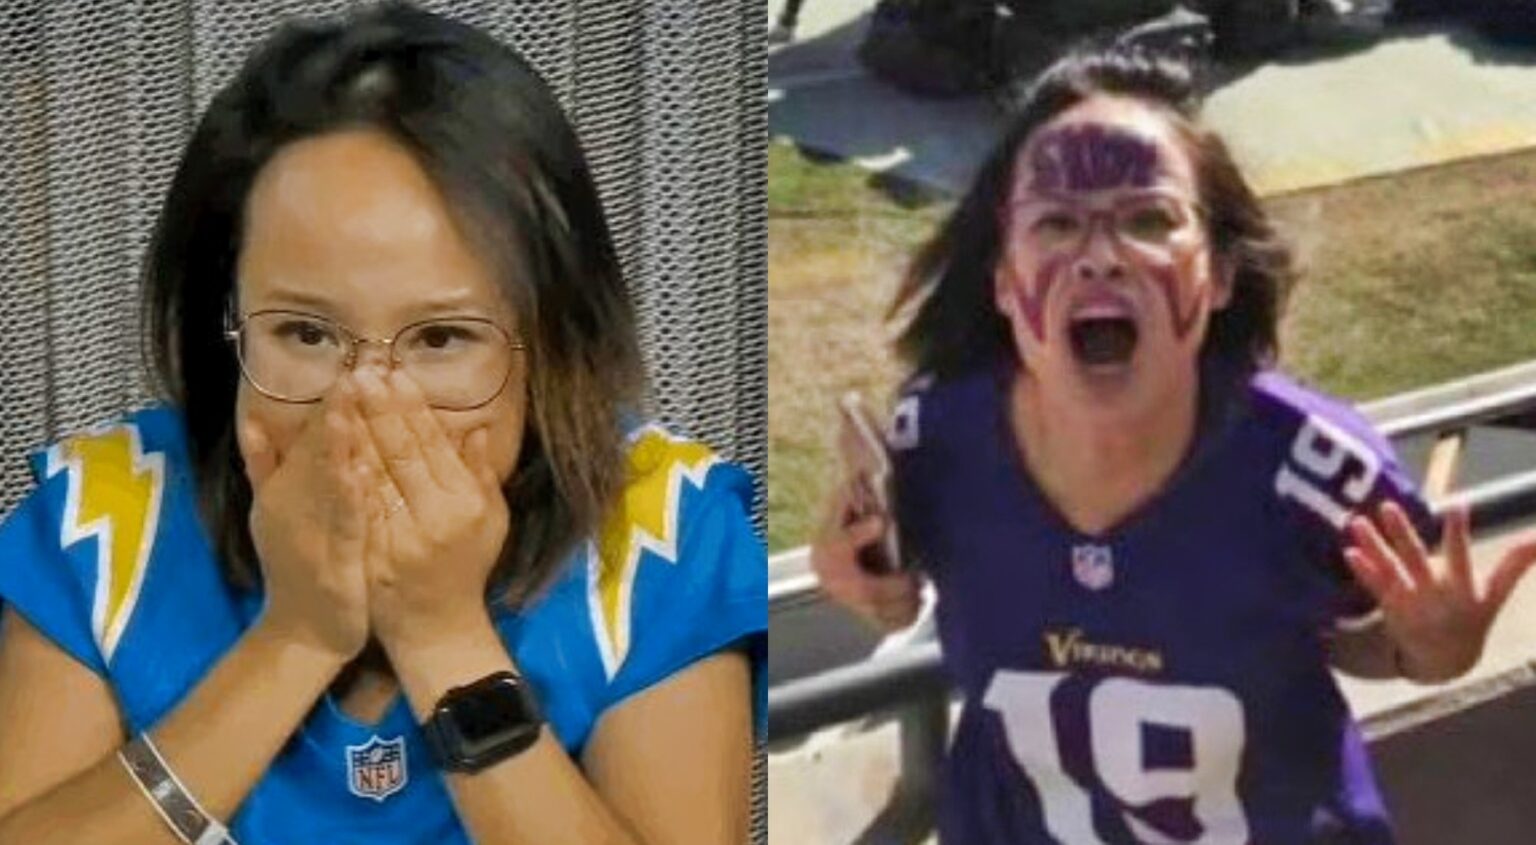 New Information Explains Why the Trending Chargers Supporter Was Caught Wearing a Vikings Jersey